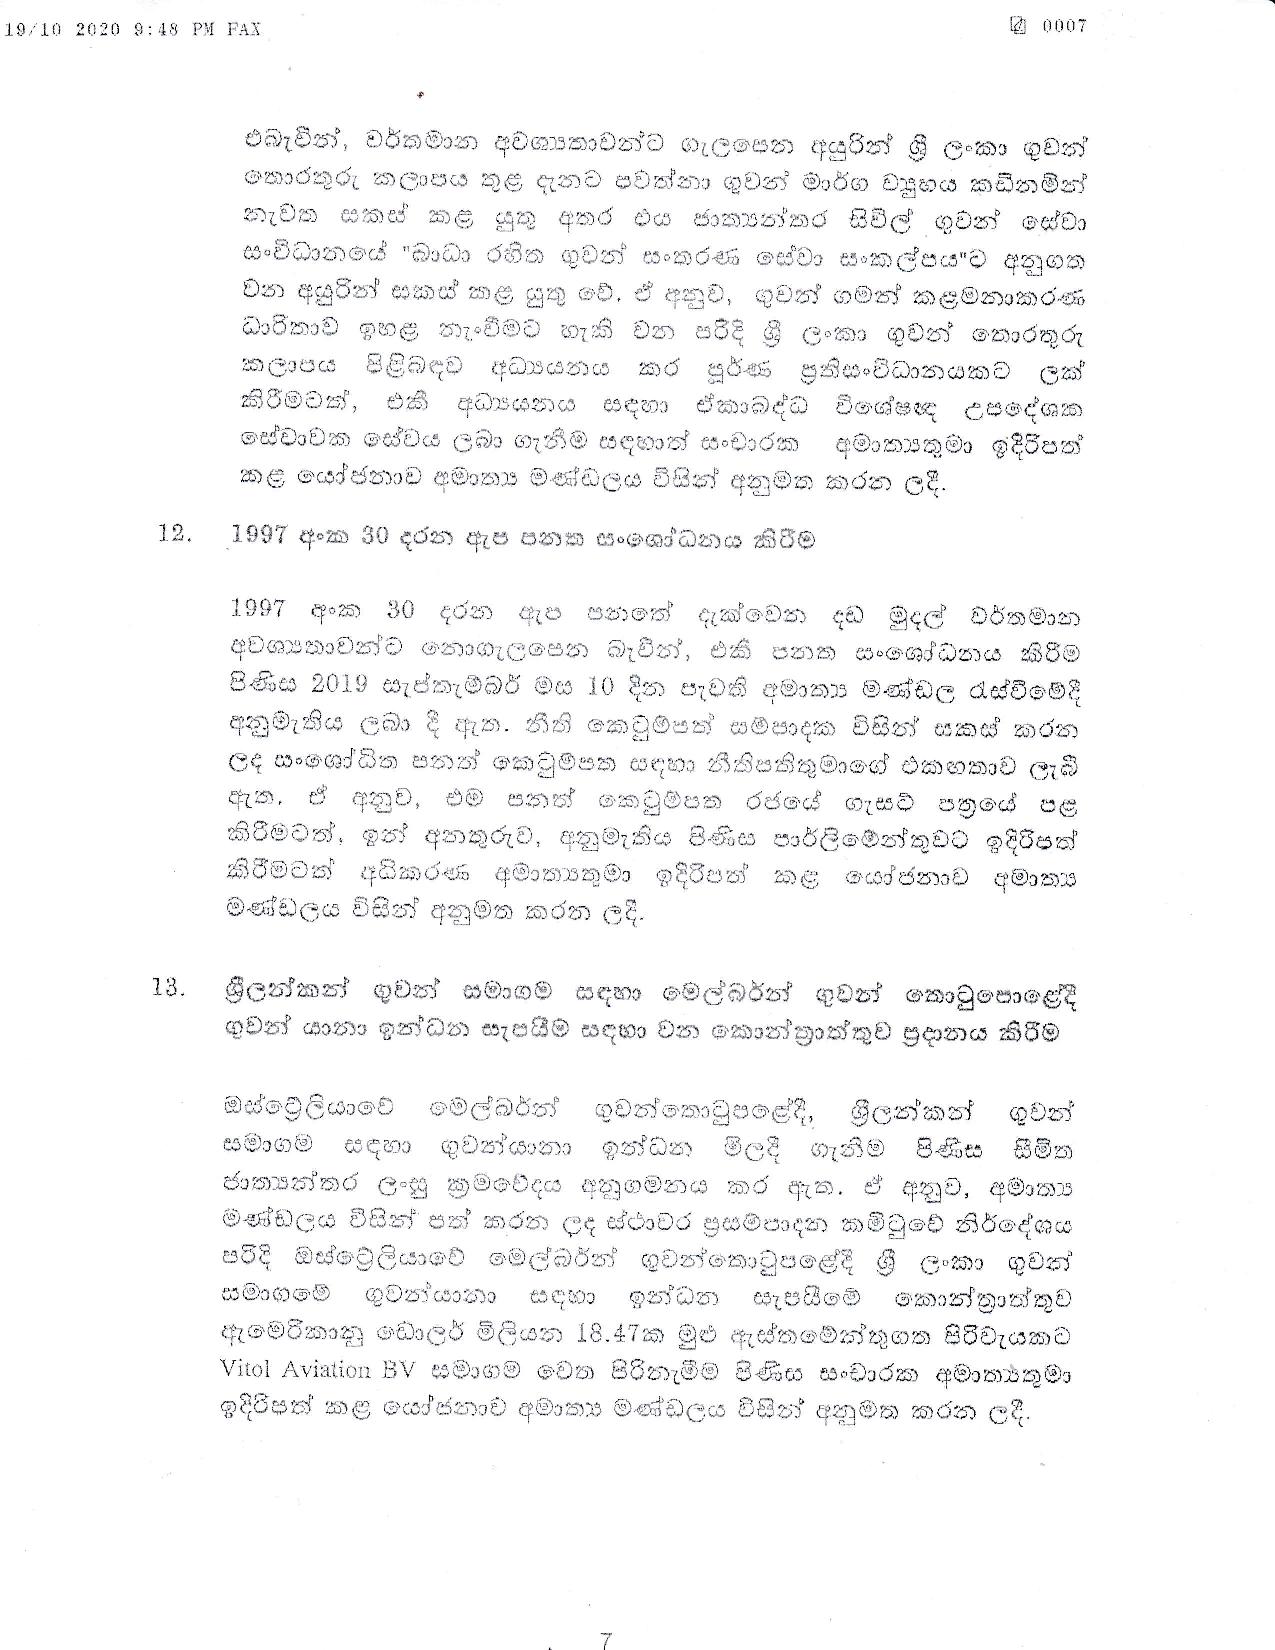 Cabinet Decision on 19.10.2020 page 007